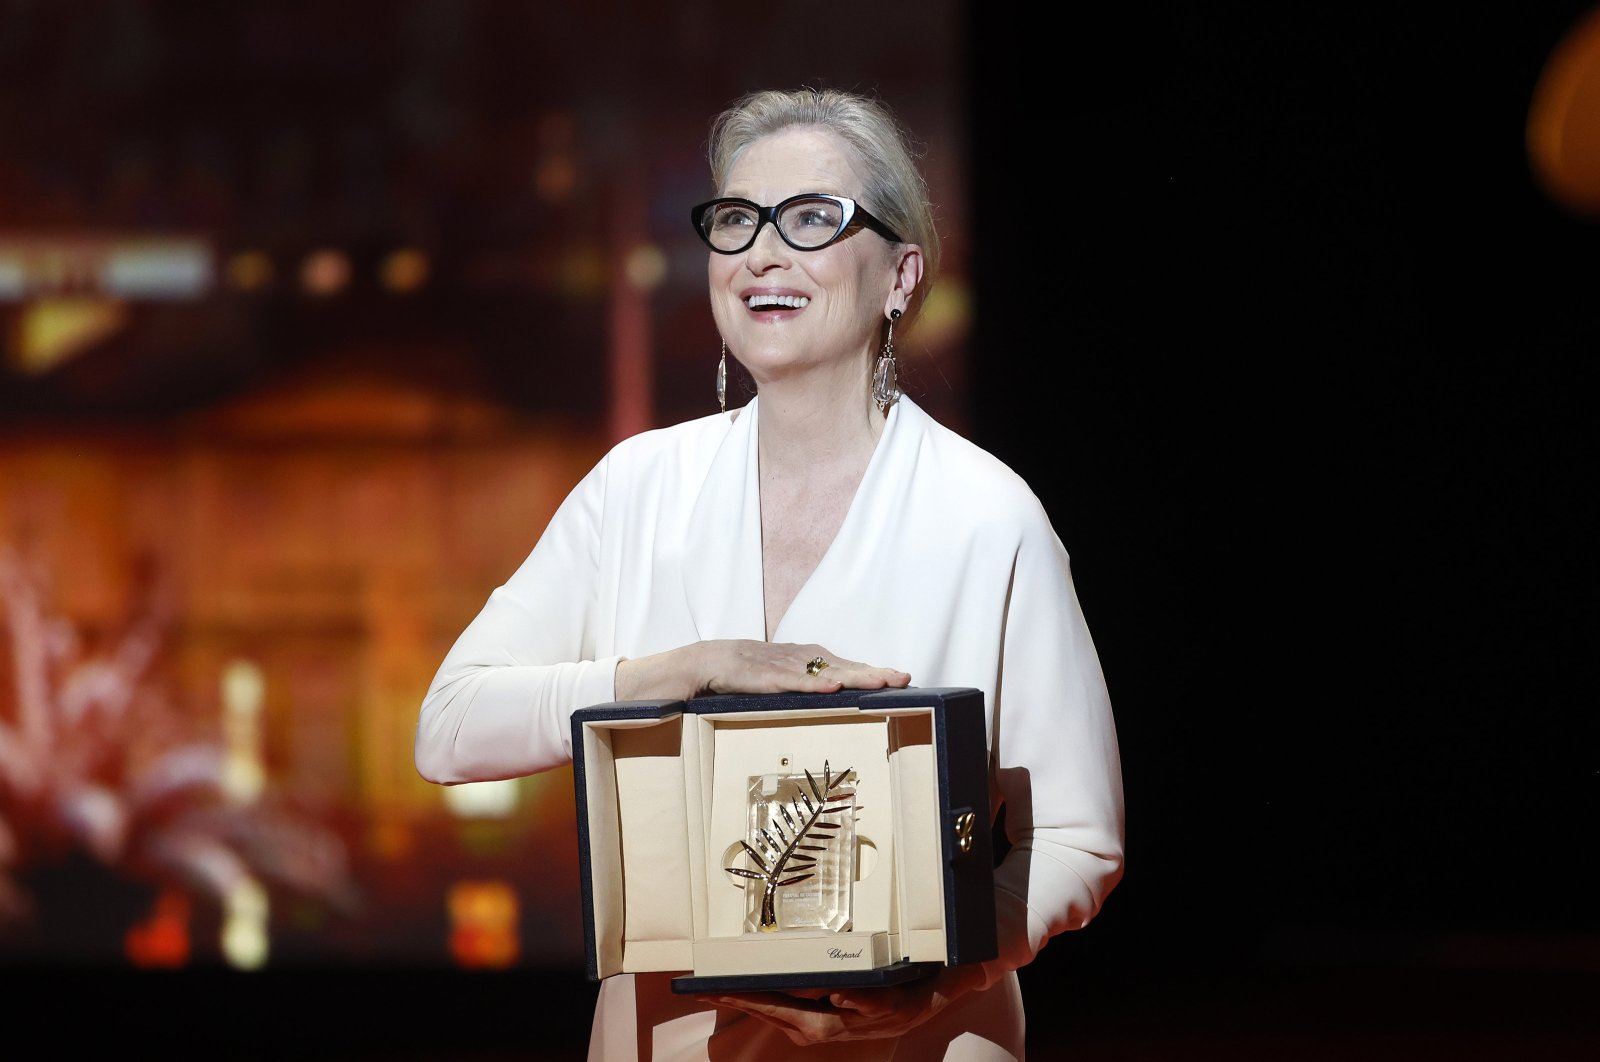 Cannes opens with strong female presence: ‘Mad Max’ debut, Streep masterclass